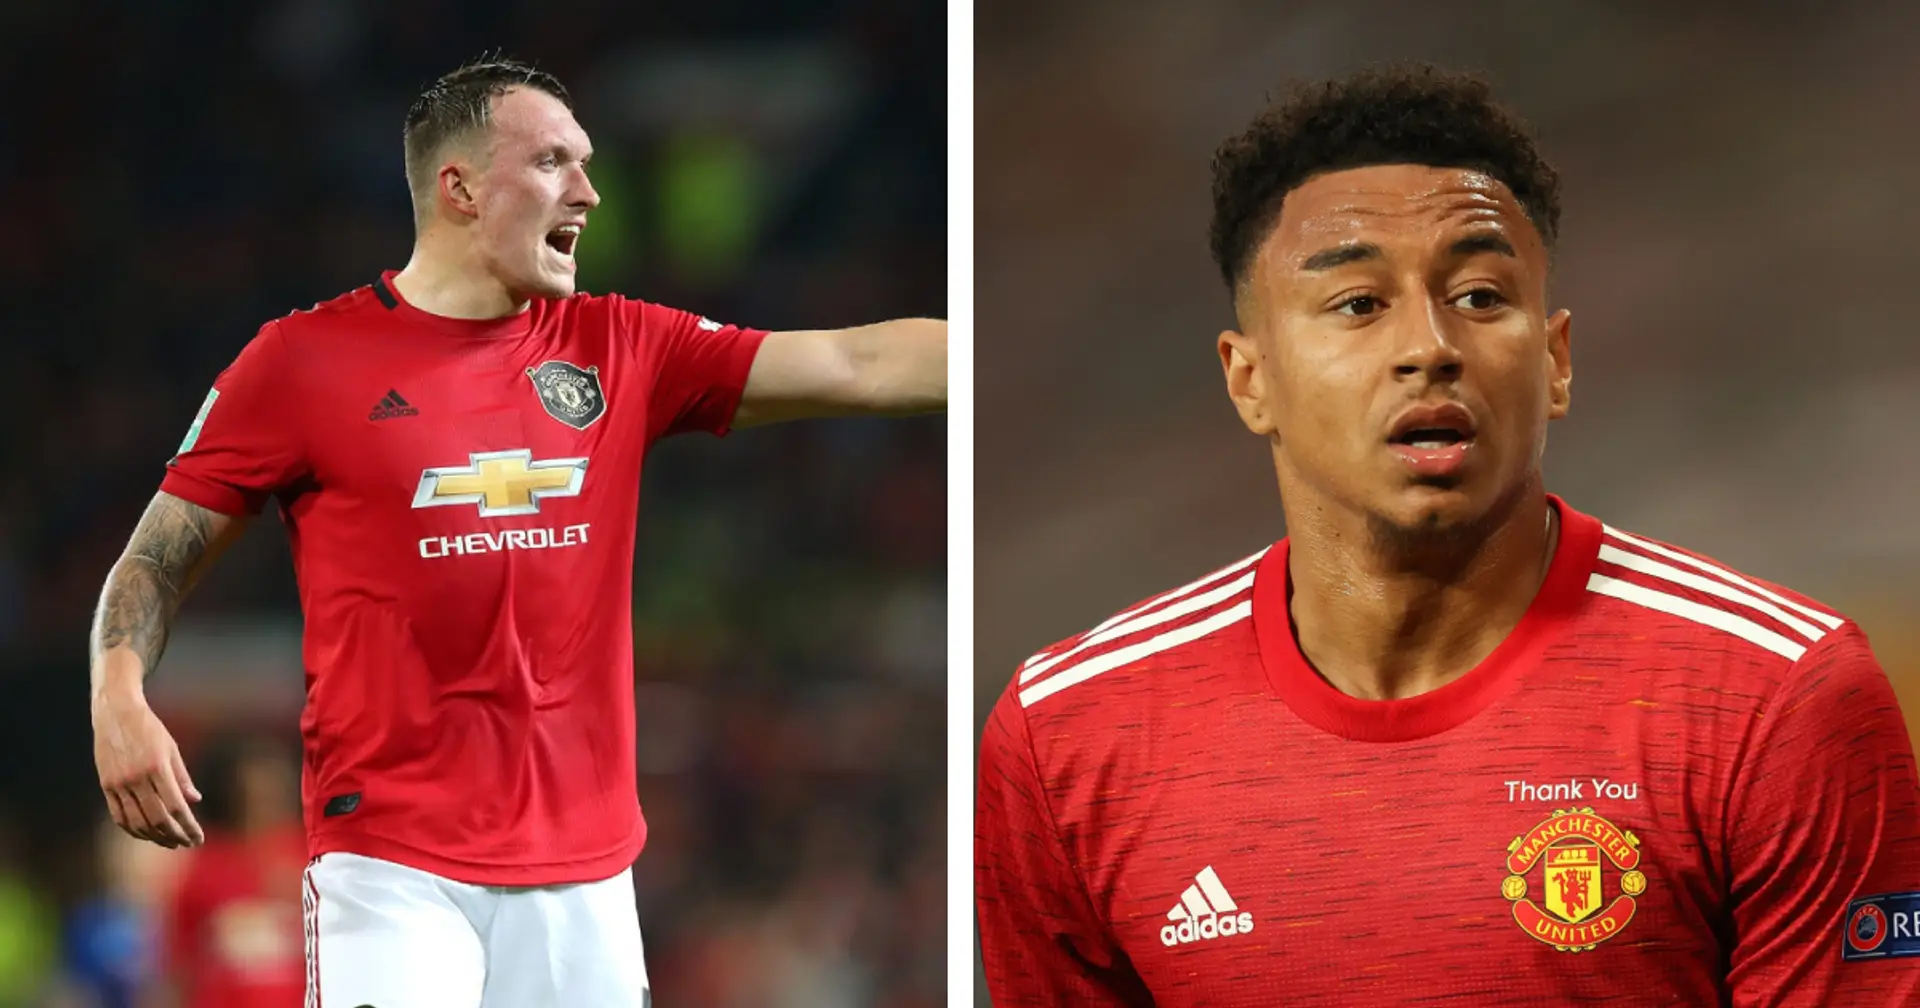 Jones unsellable, Lingard could leave: state of Man United outcasts 2 weeks before transfer deadline